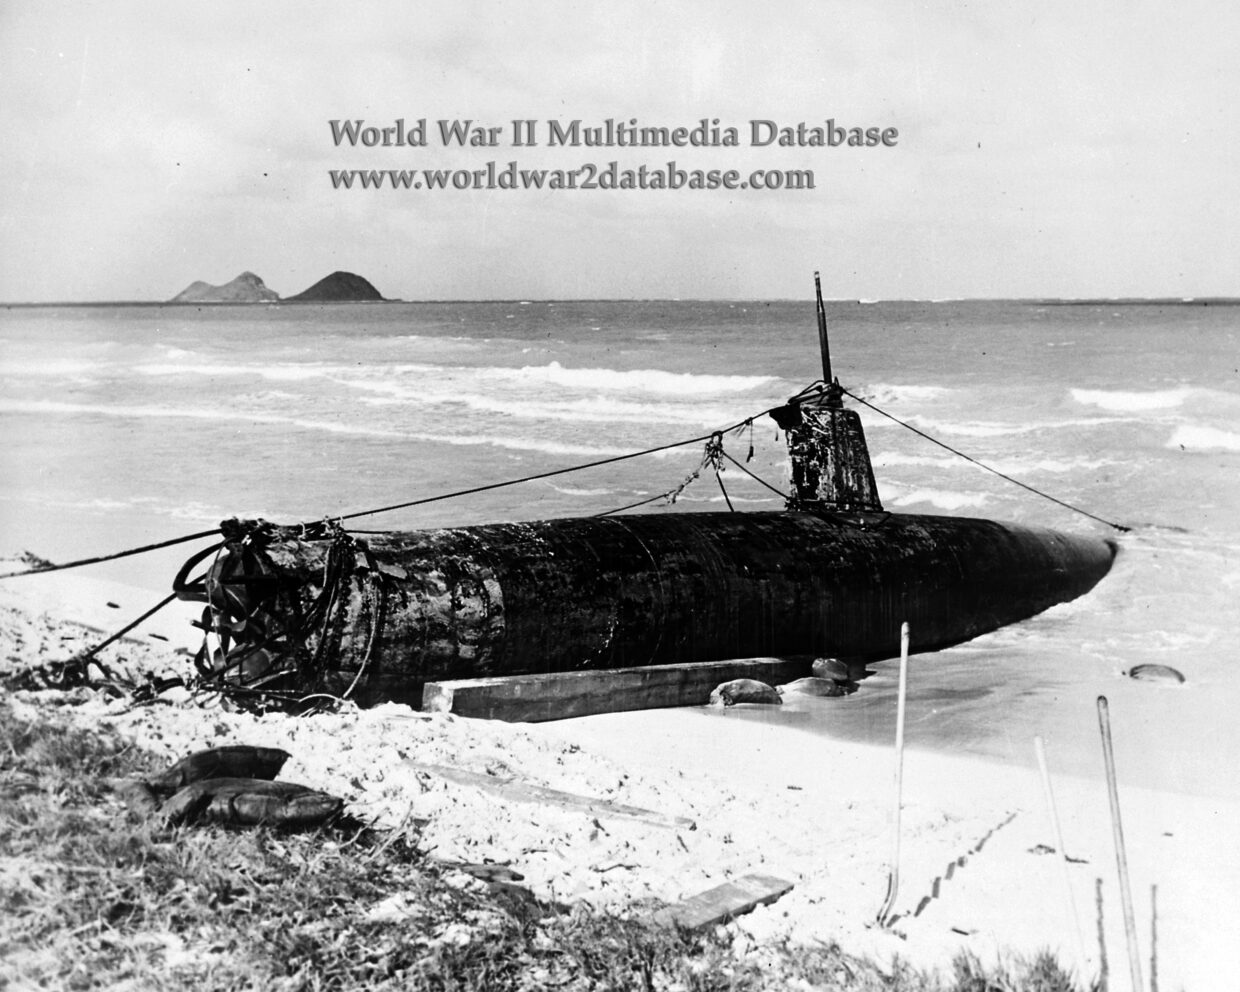 Imperial Japanese Navy Submarine HA-19 After She Was Pulled Up On Shore Near Bellows Field